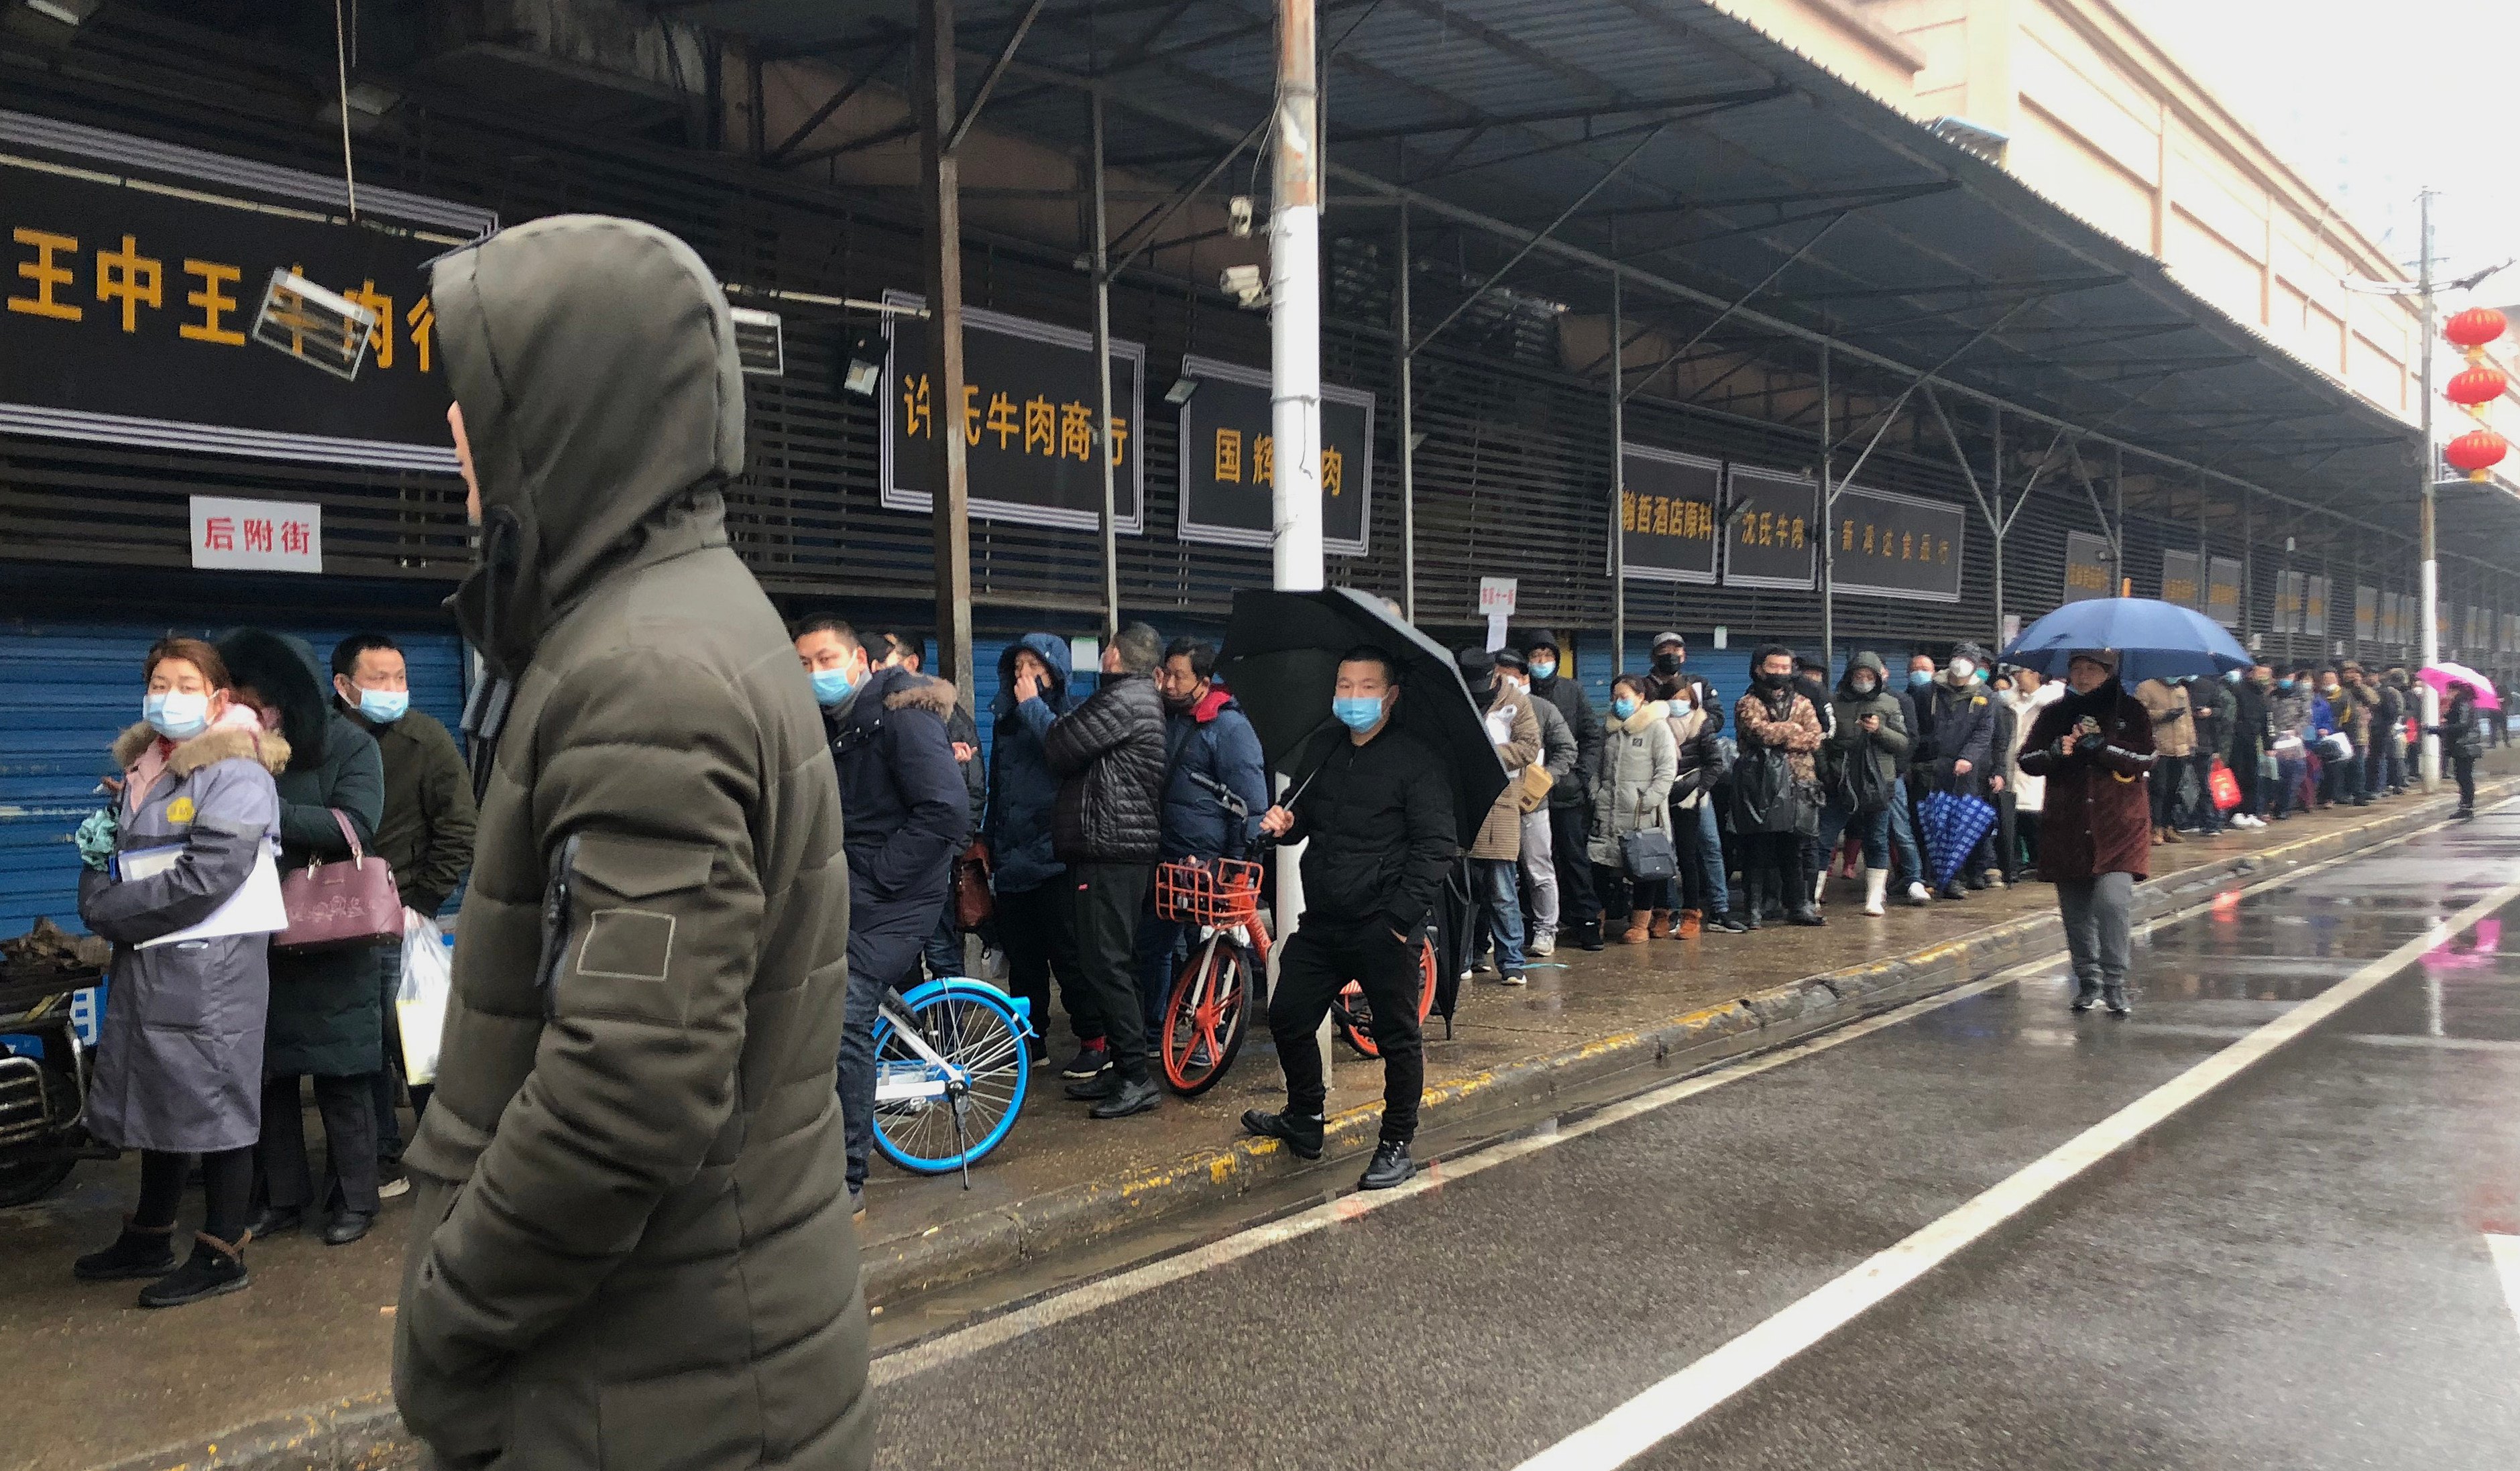 Tenants who ran shops at Wuhan’s Huanan Seafood Market queue up to end their contracts following the market’s closure on January 22, 2020. Photo: Simon Song